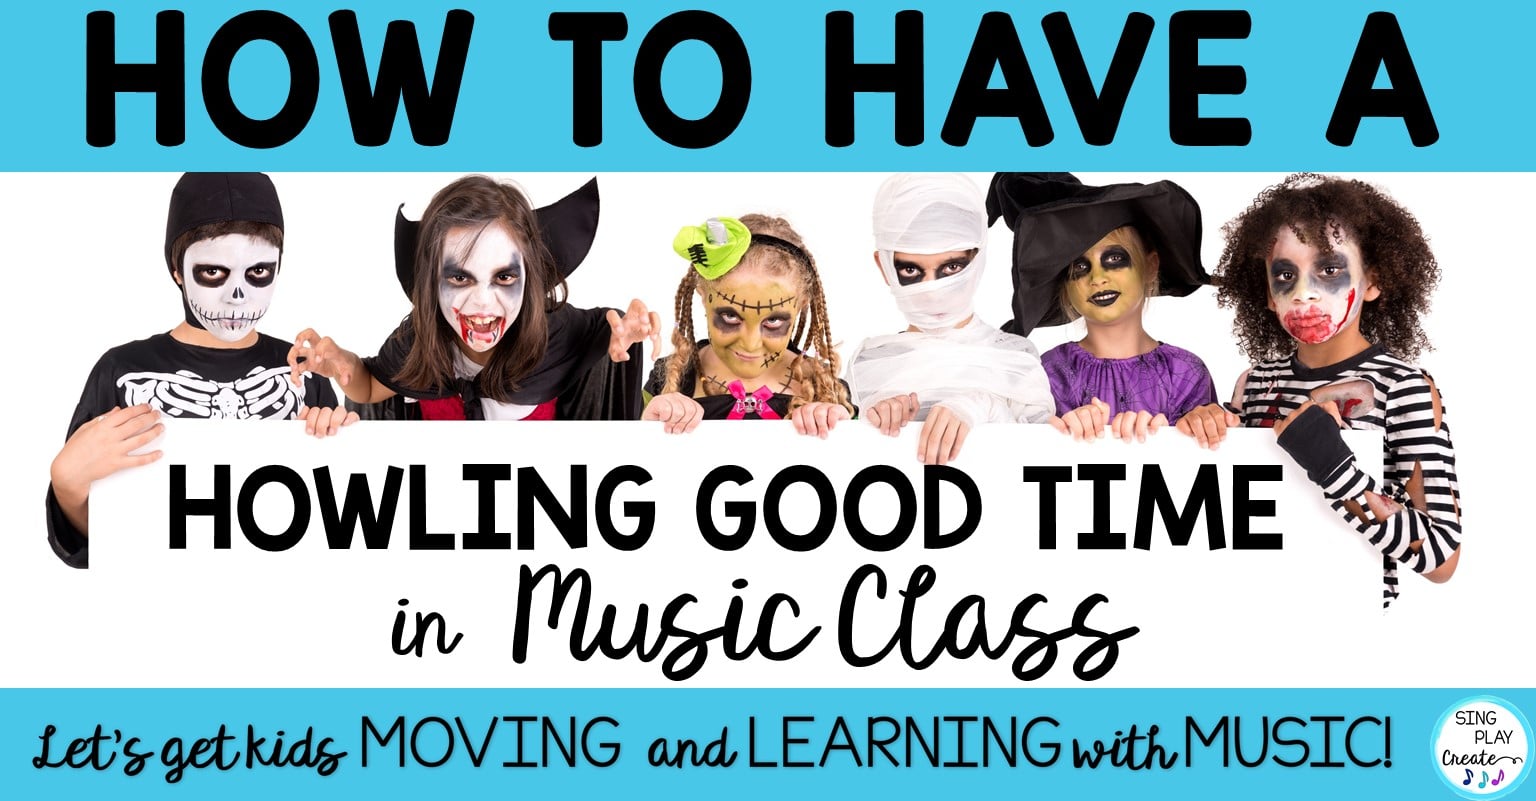 You are currently viewing How to Have a Howling Good Time in Music Class